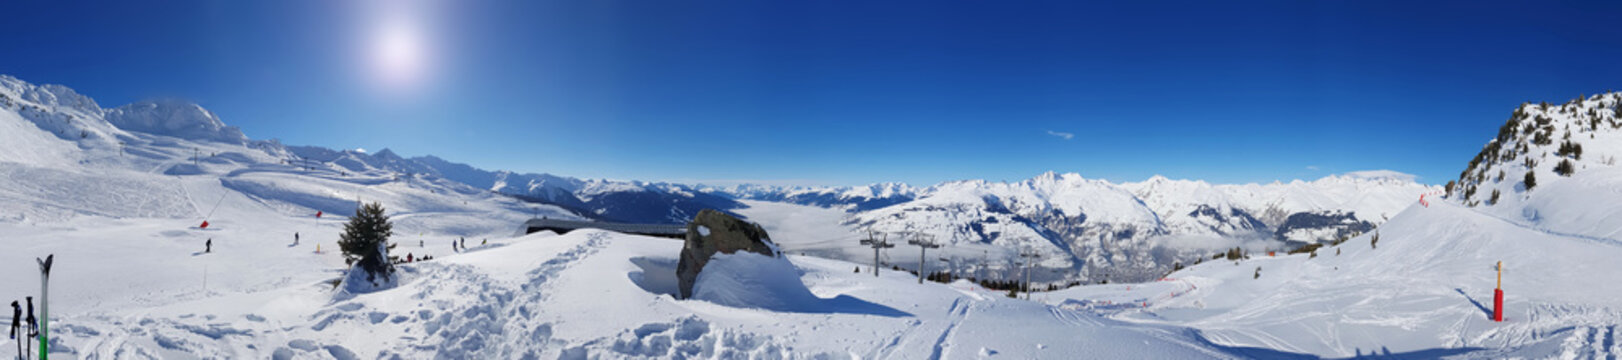 beautiful panoramic landscape on the slopes in  the snowy mountain under sunny blue sky